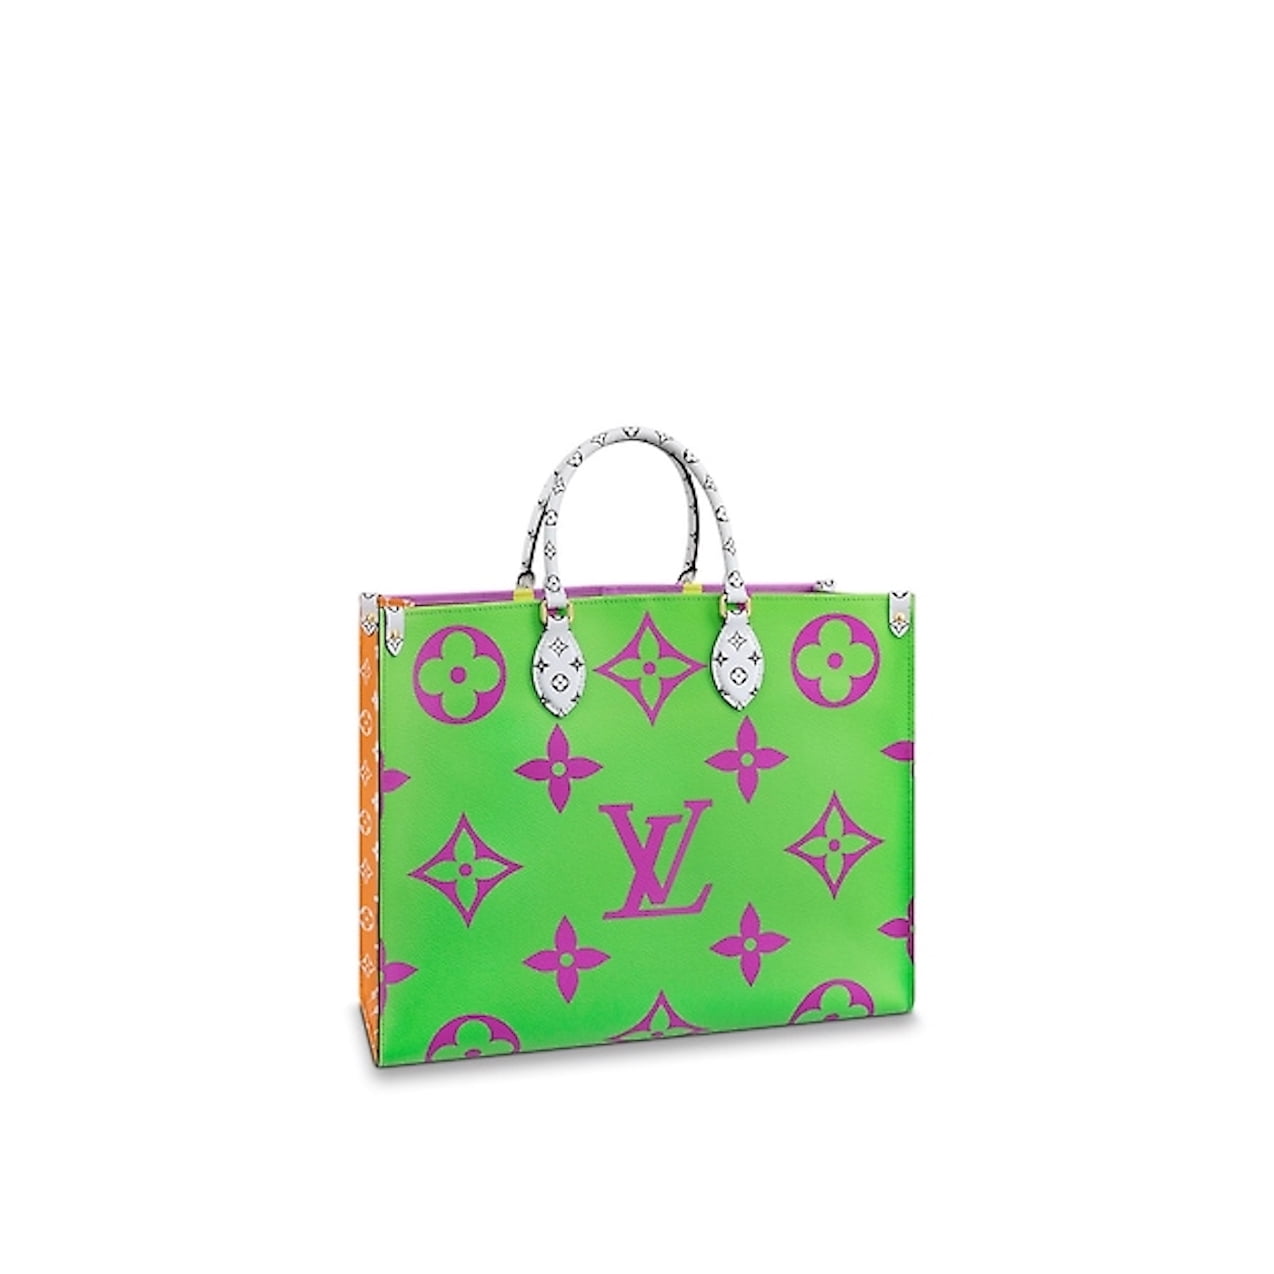 Louis Vuitton on X: For a fierce statement. This fall, animal prints bring  a graphic effect to #LouisVuitton's oversized Monogram Giant motif.  Discover the new Monogram Jungle Collection at    /